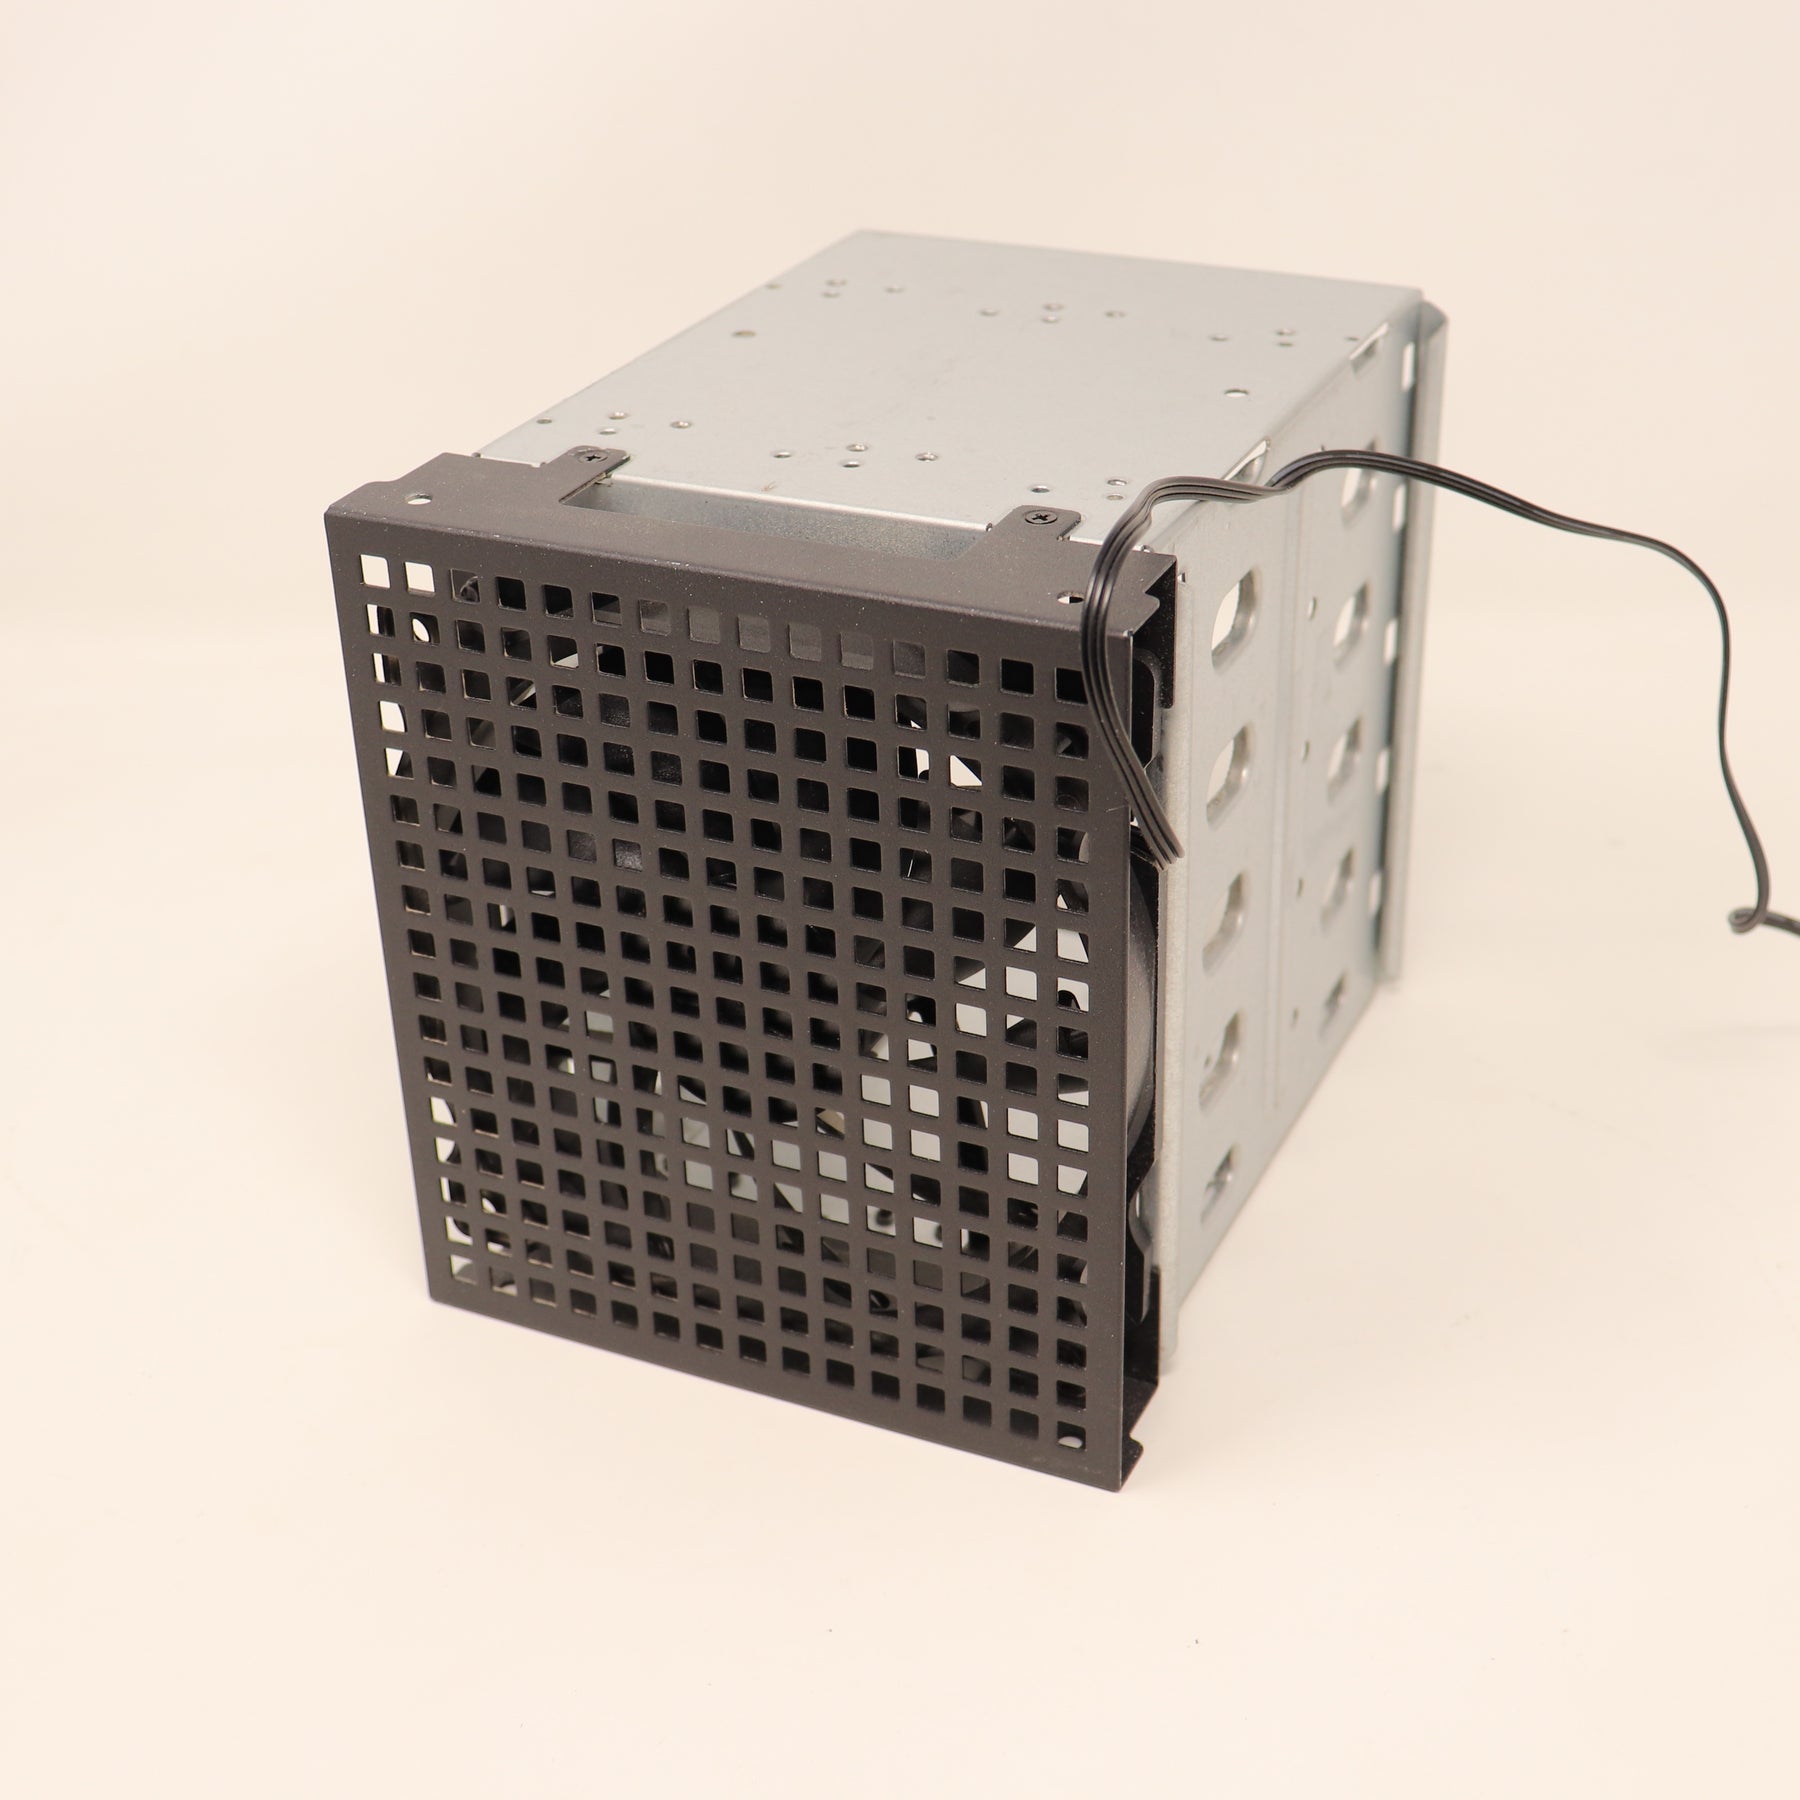 5-Bay 3.5" Hard Drive Rack Cage Enclosure with Fan